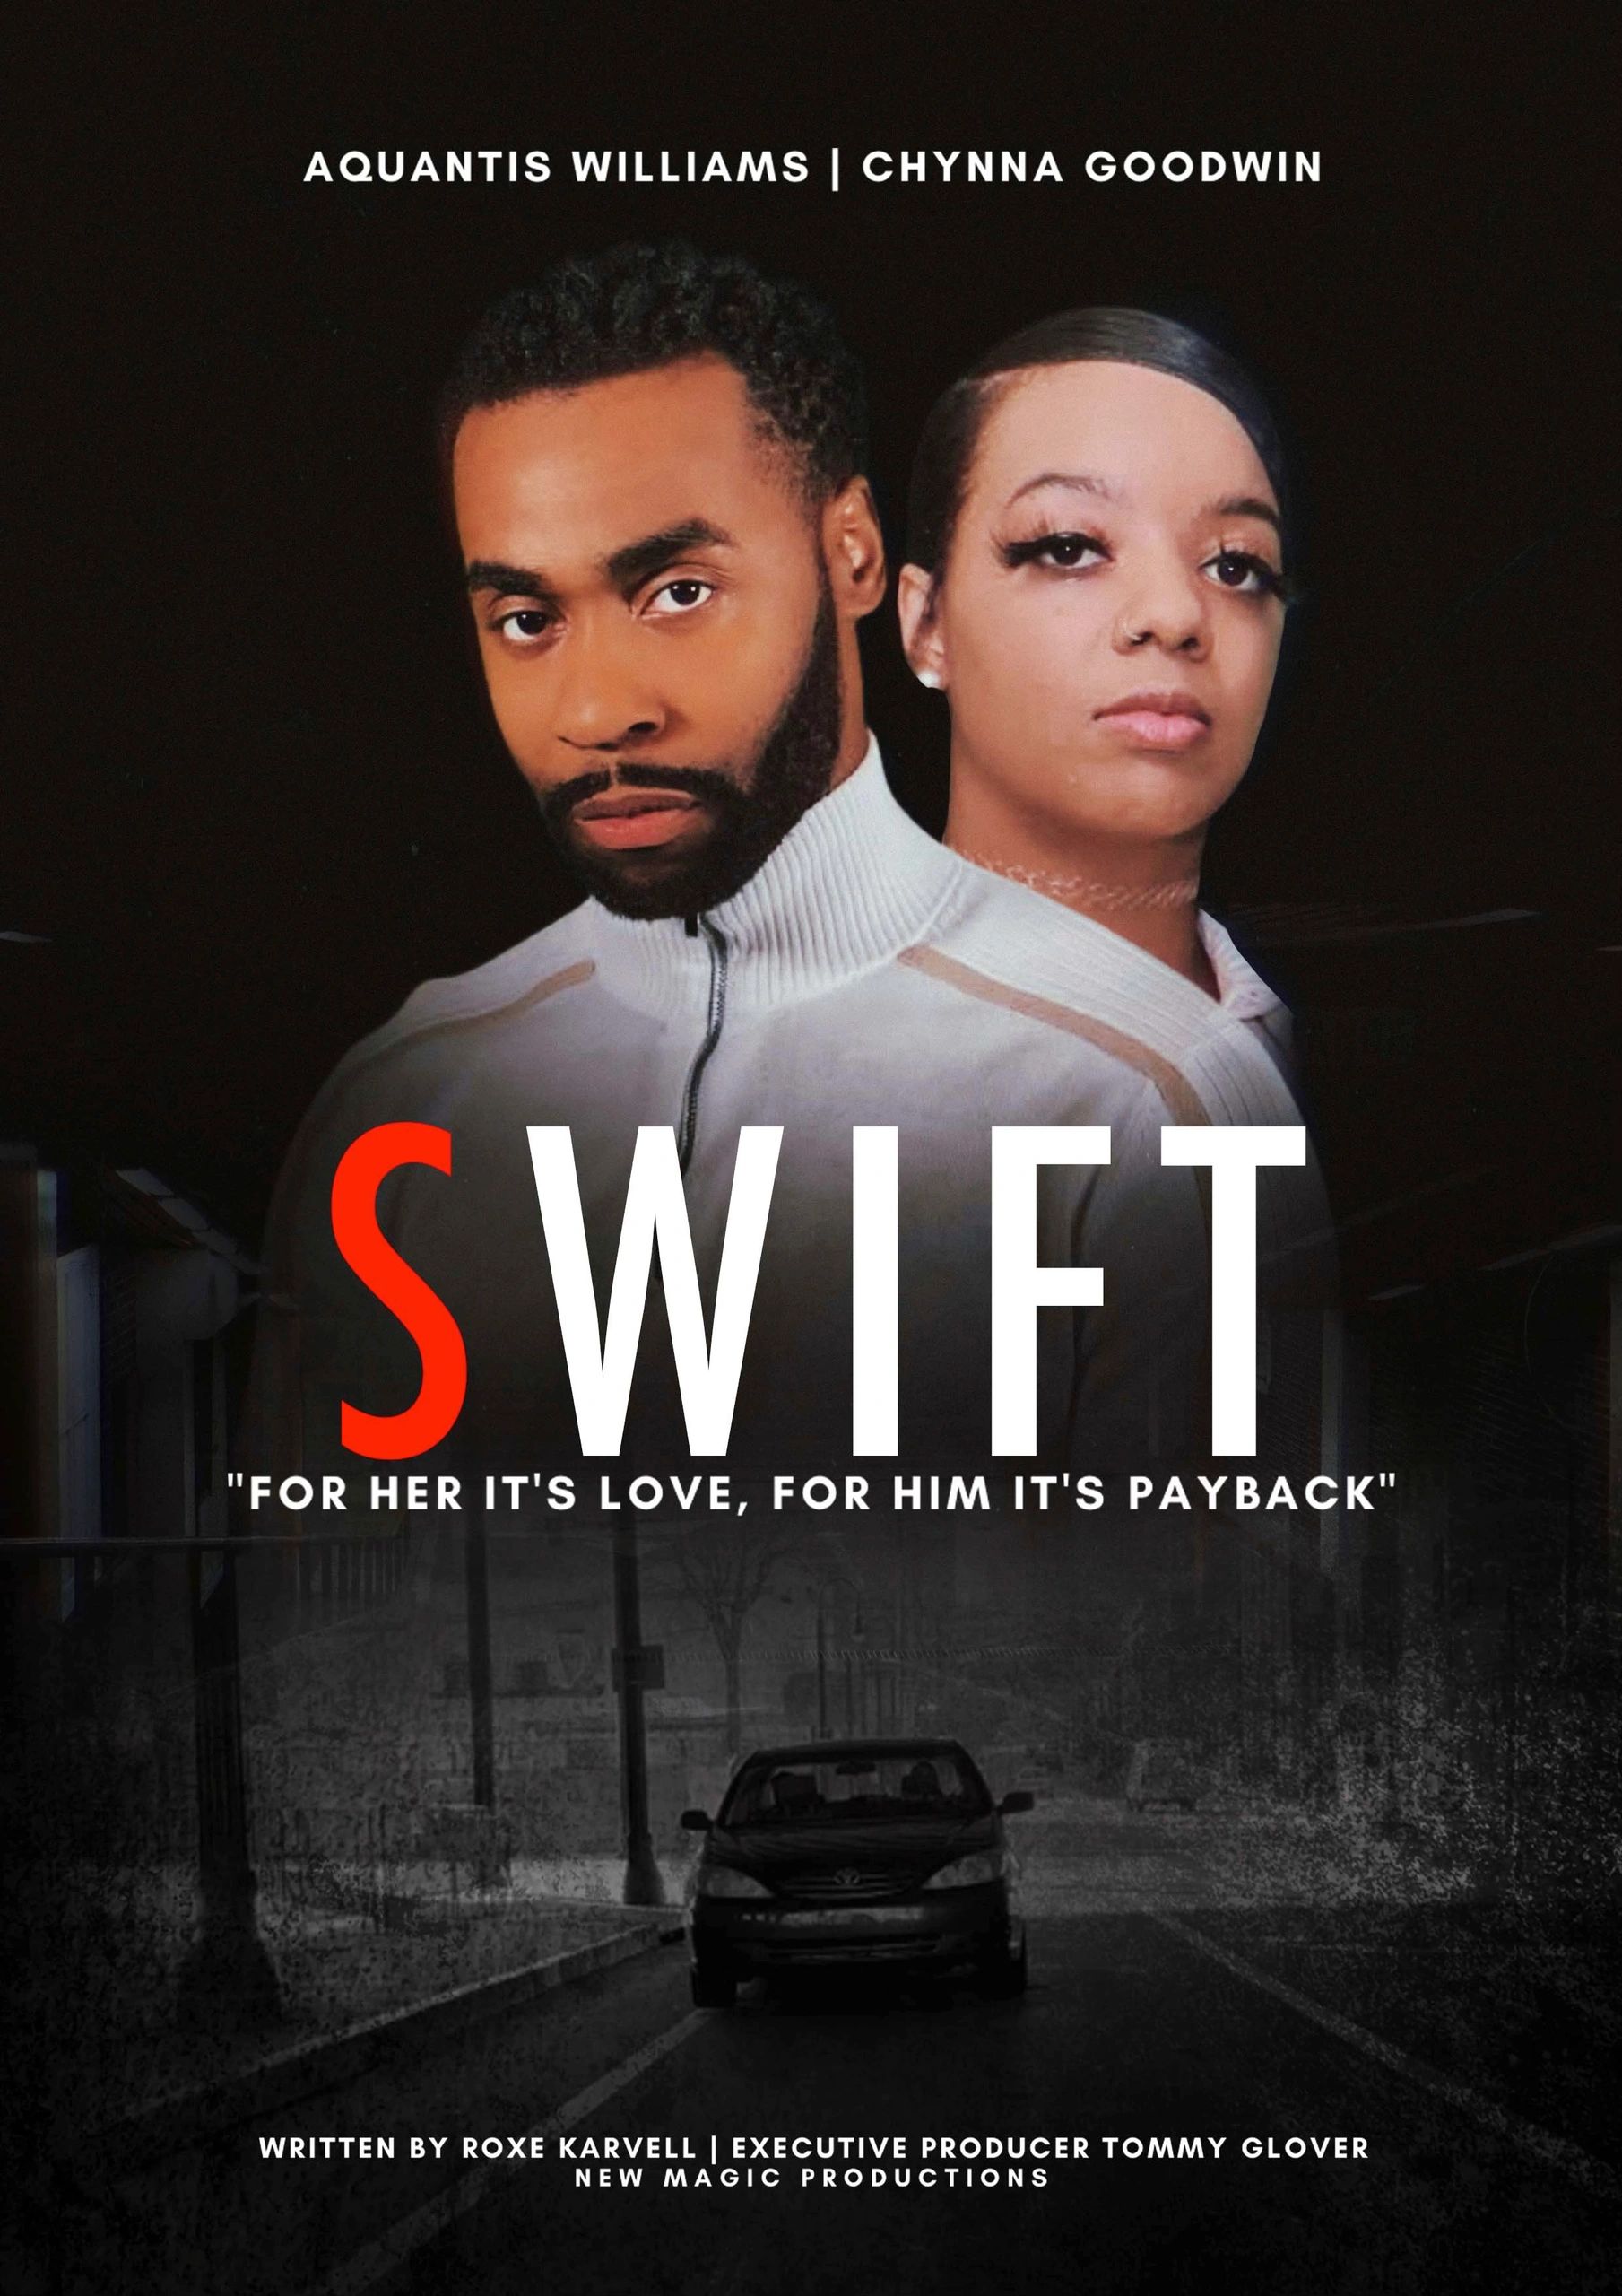 SWIFT - Movie poster Cover 
Property of New Magic Productions, LLC 2021